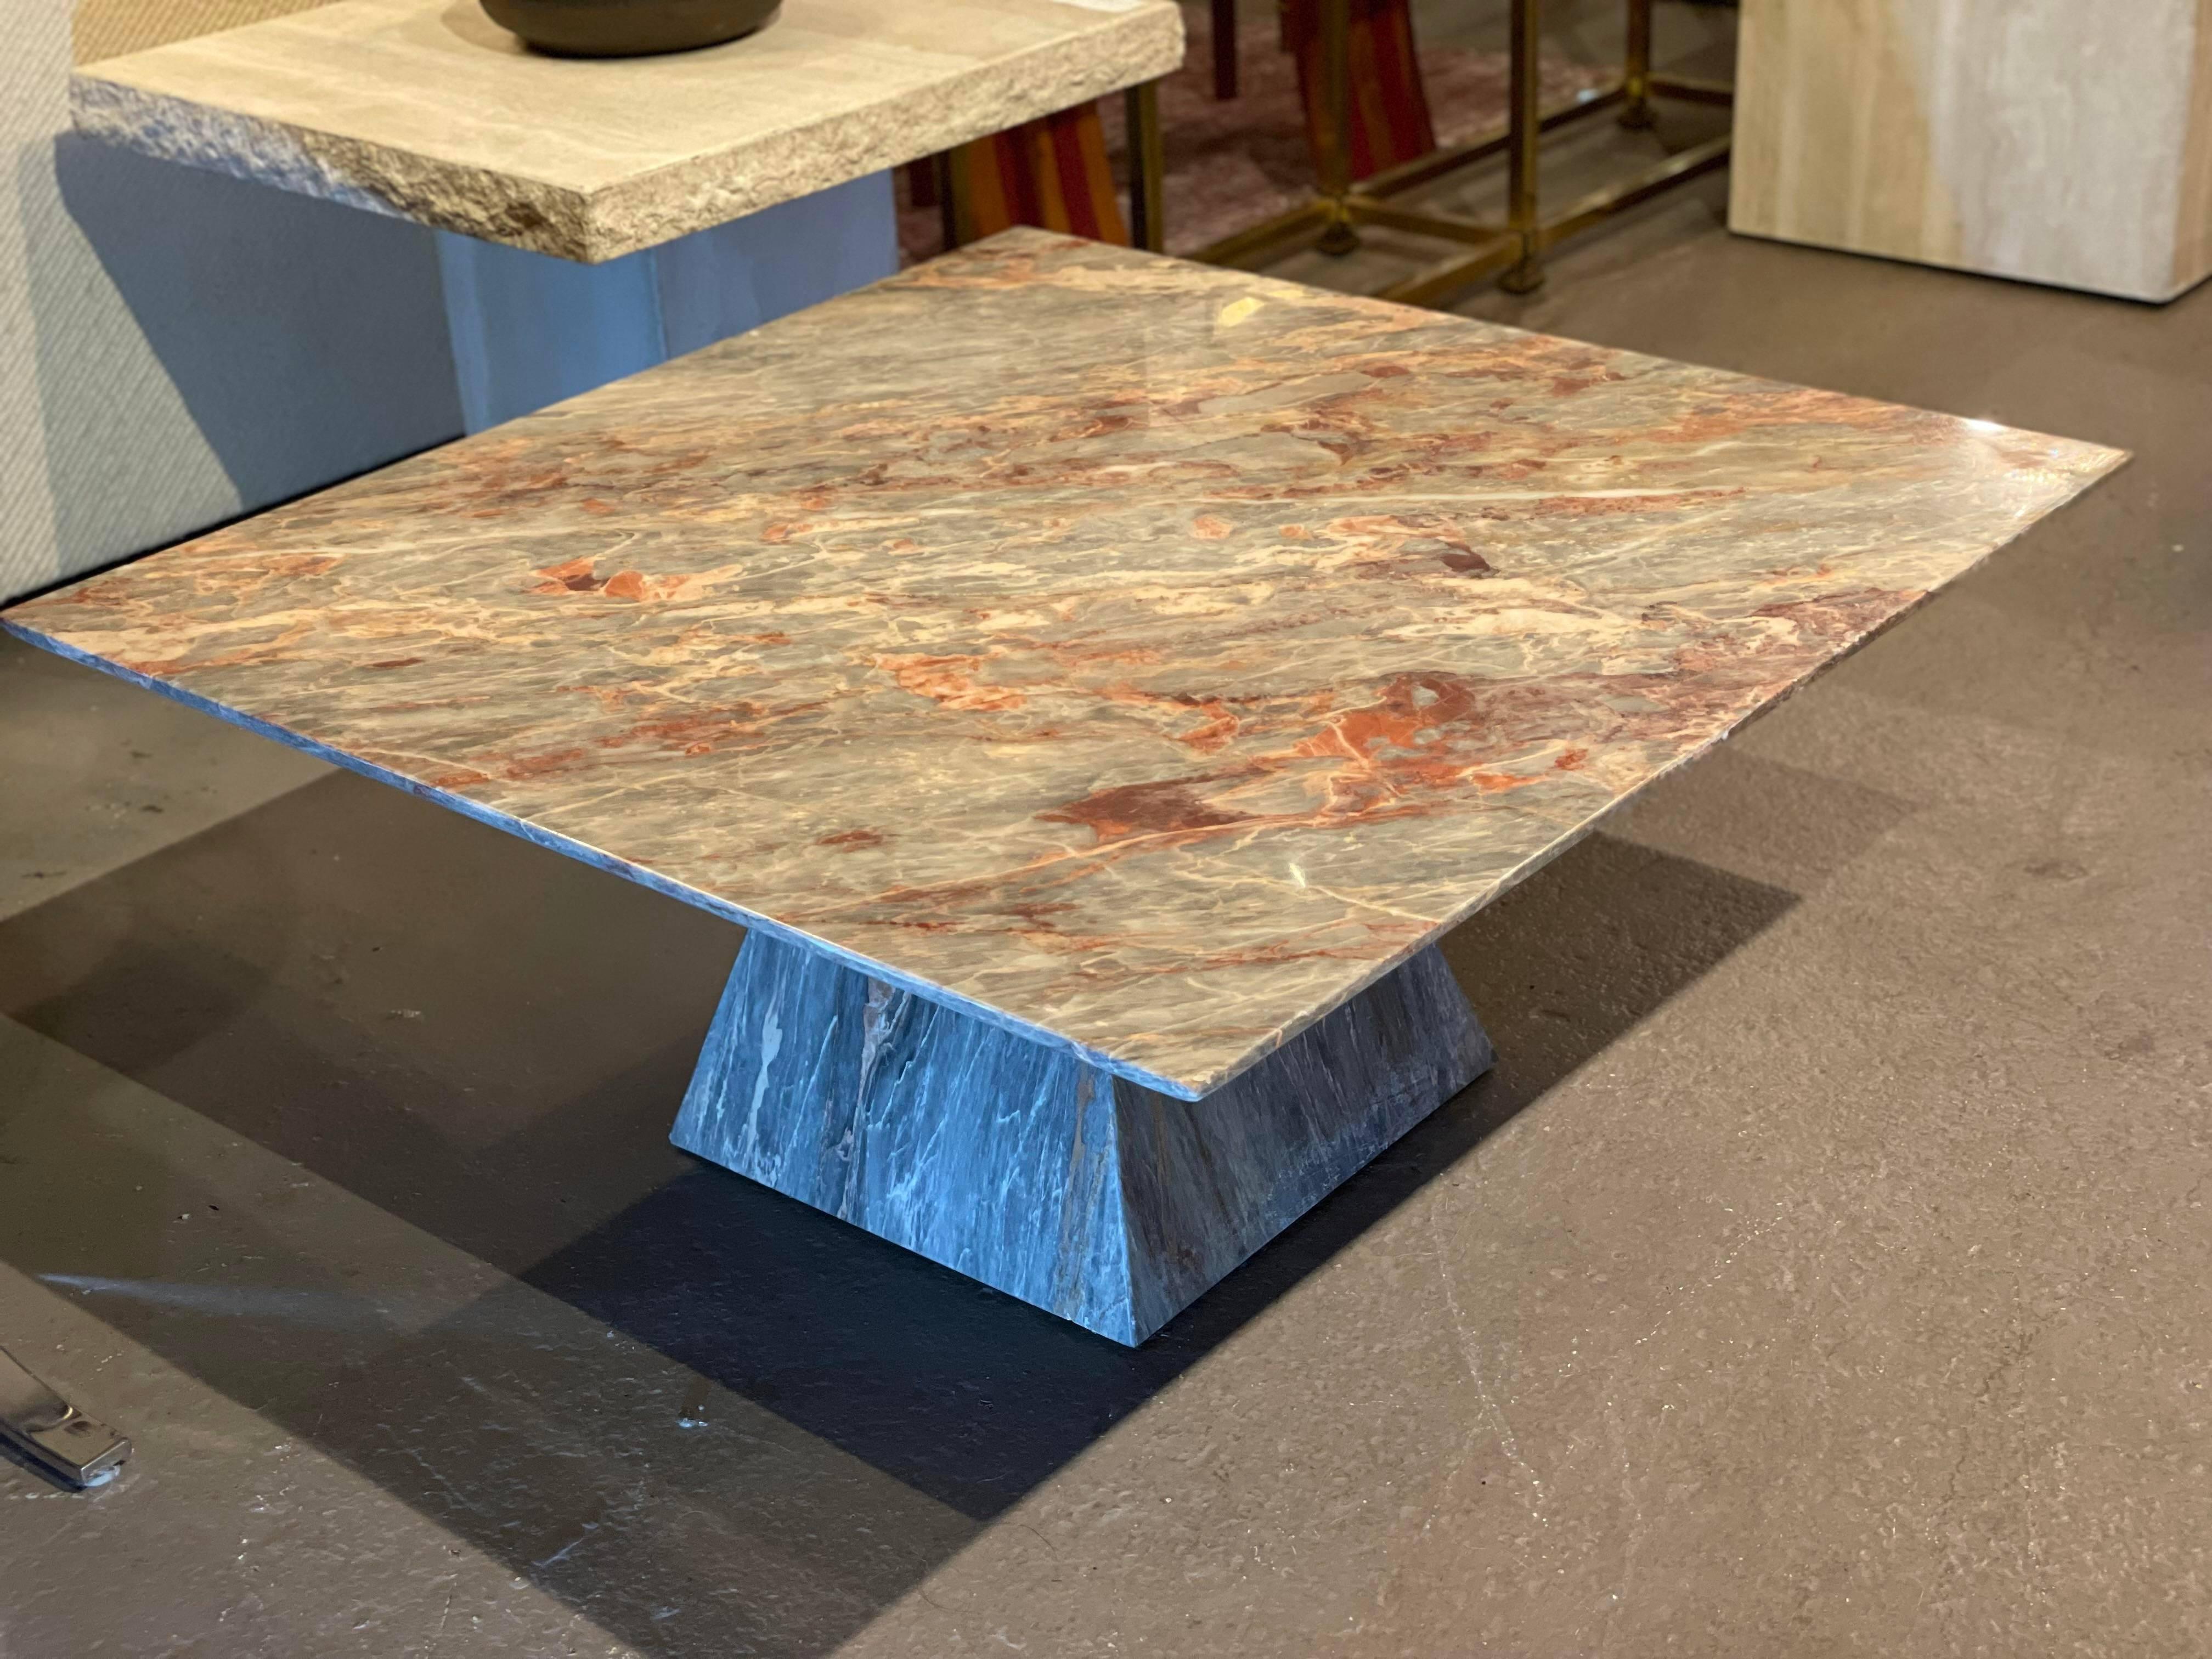 Oh boy!! The colors of this table. A neutral gray background with every shade of peach veining through it. It’s simply stunning. So elegant.

Dimensions: 39